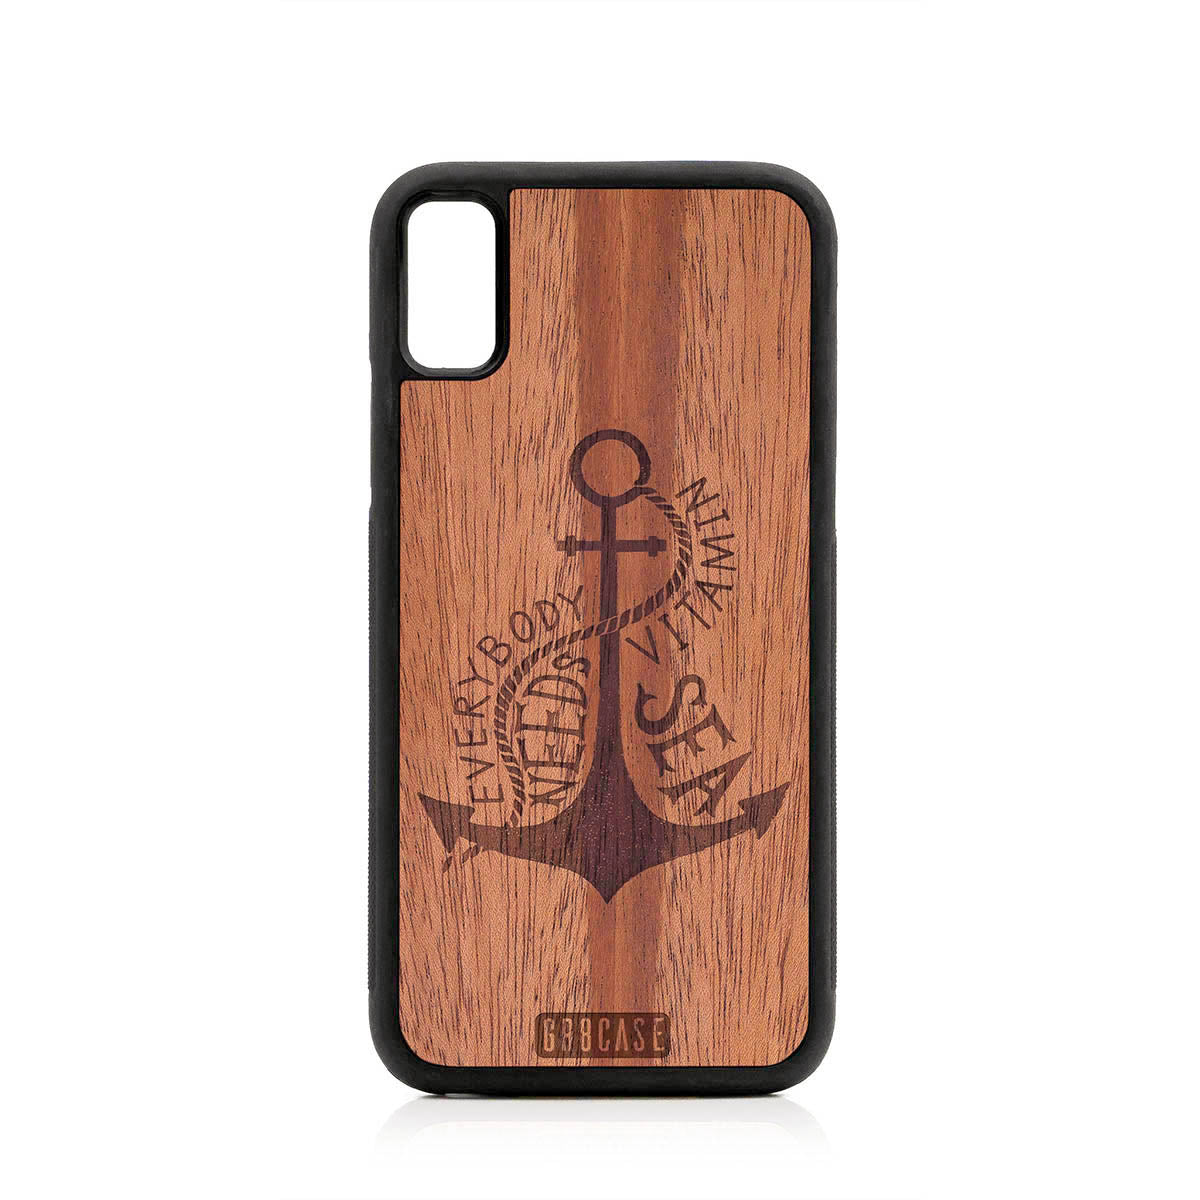 Everybody Needs Vitamin Sea (Anchor) Design Wood Case For iPhone XS Max by GR8CASE